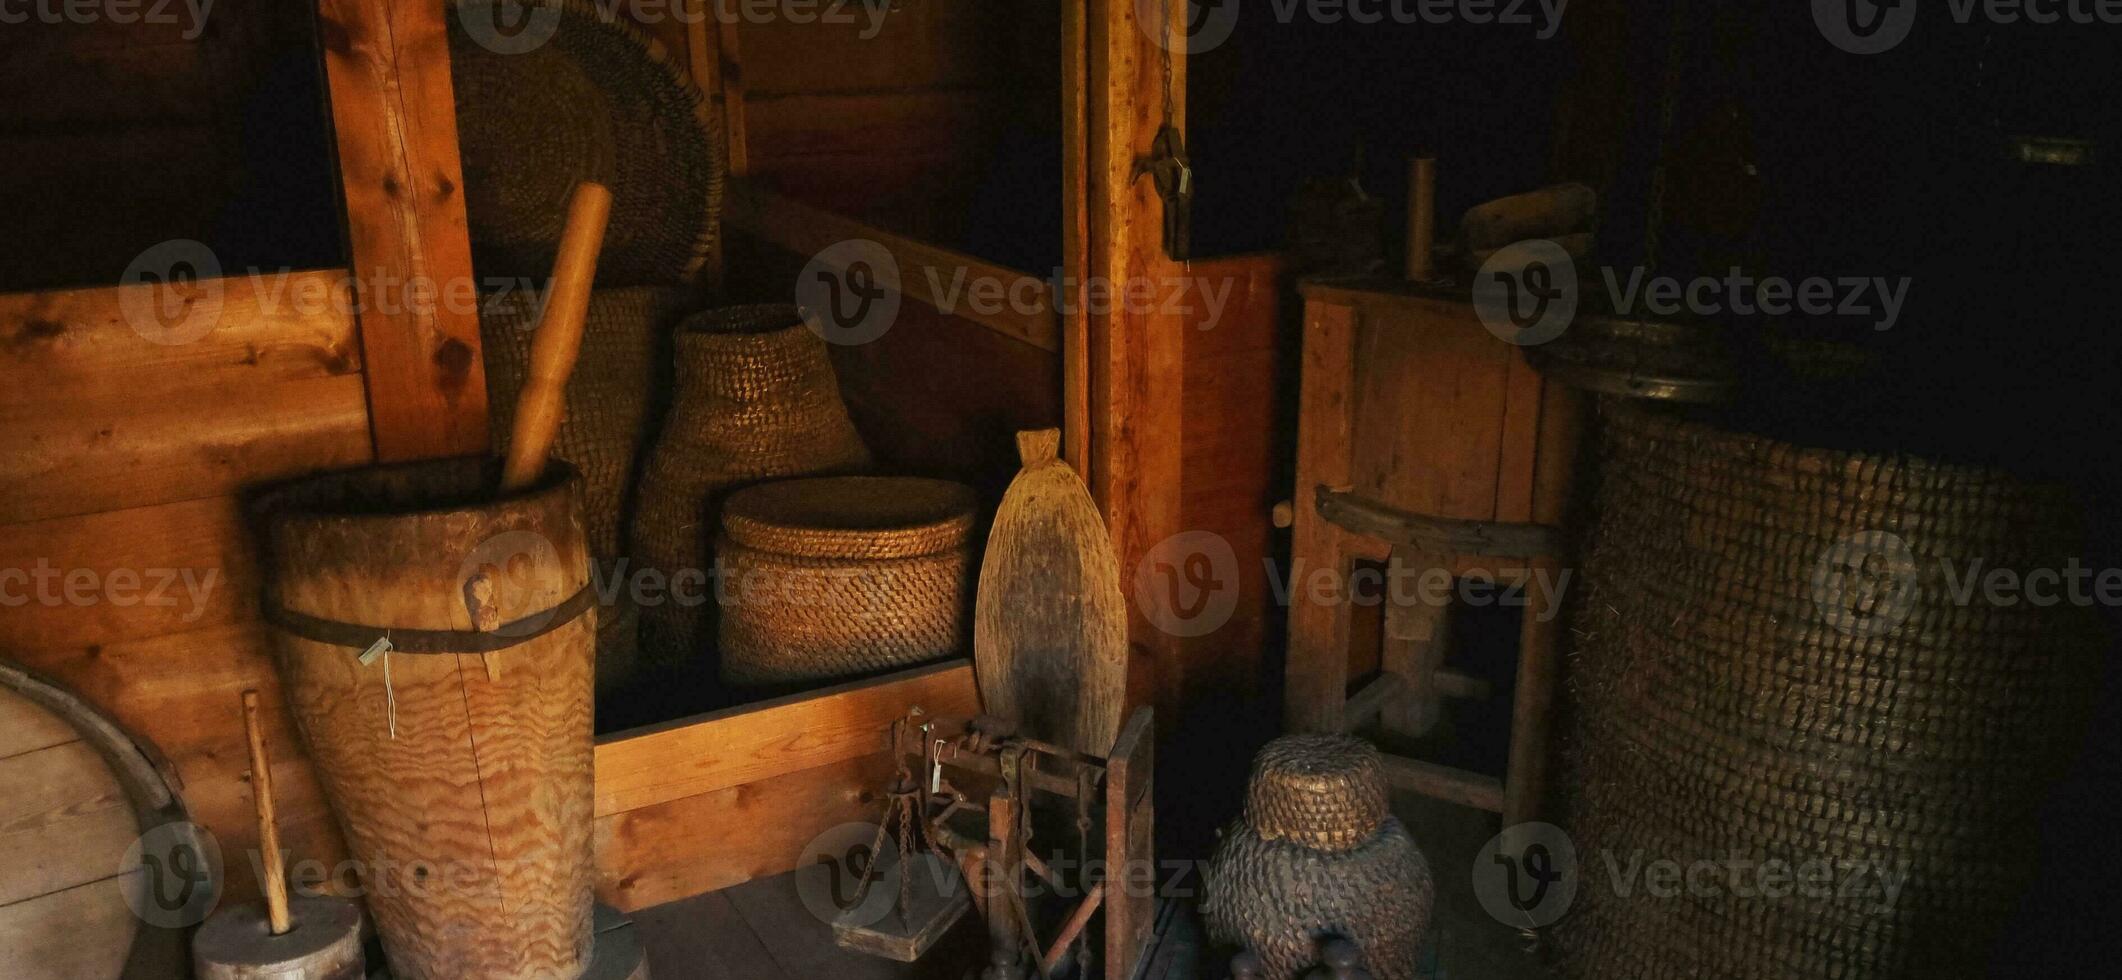 Close up shot of the vintage, rural household items. History photo